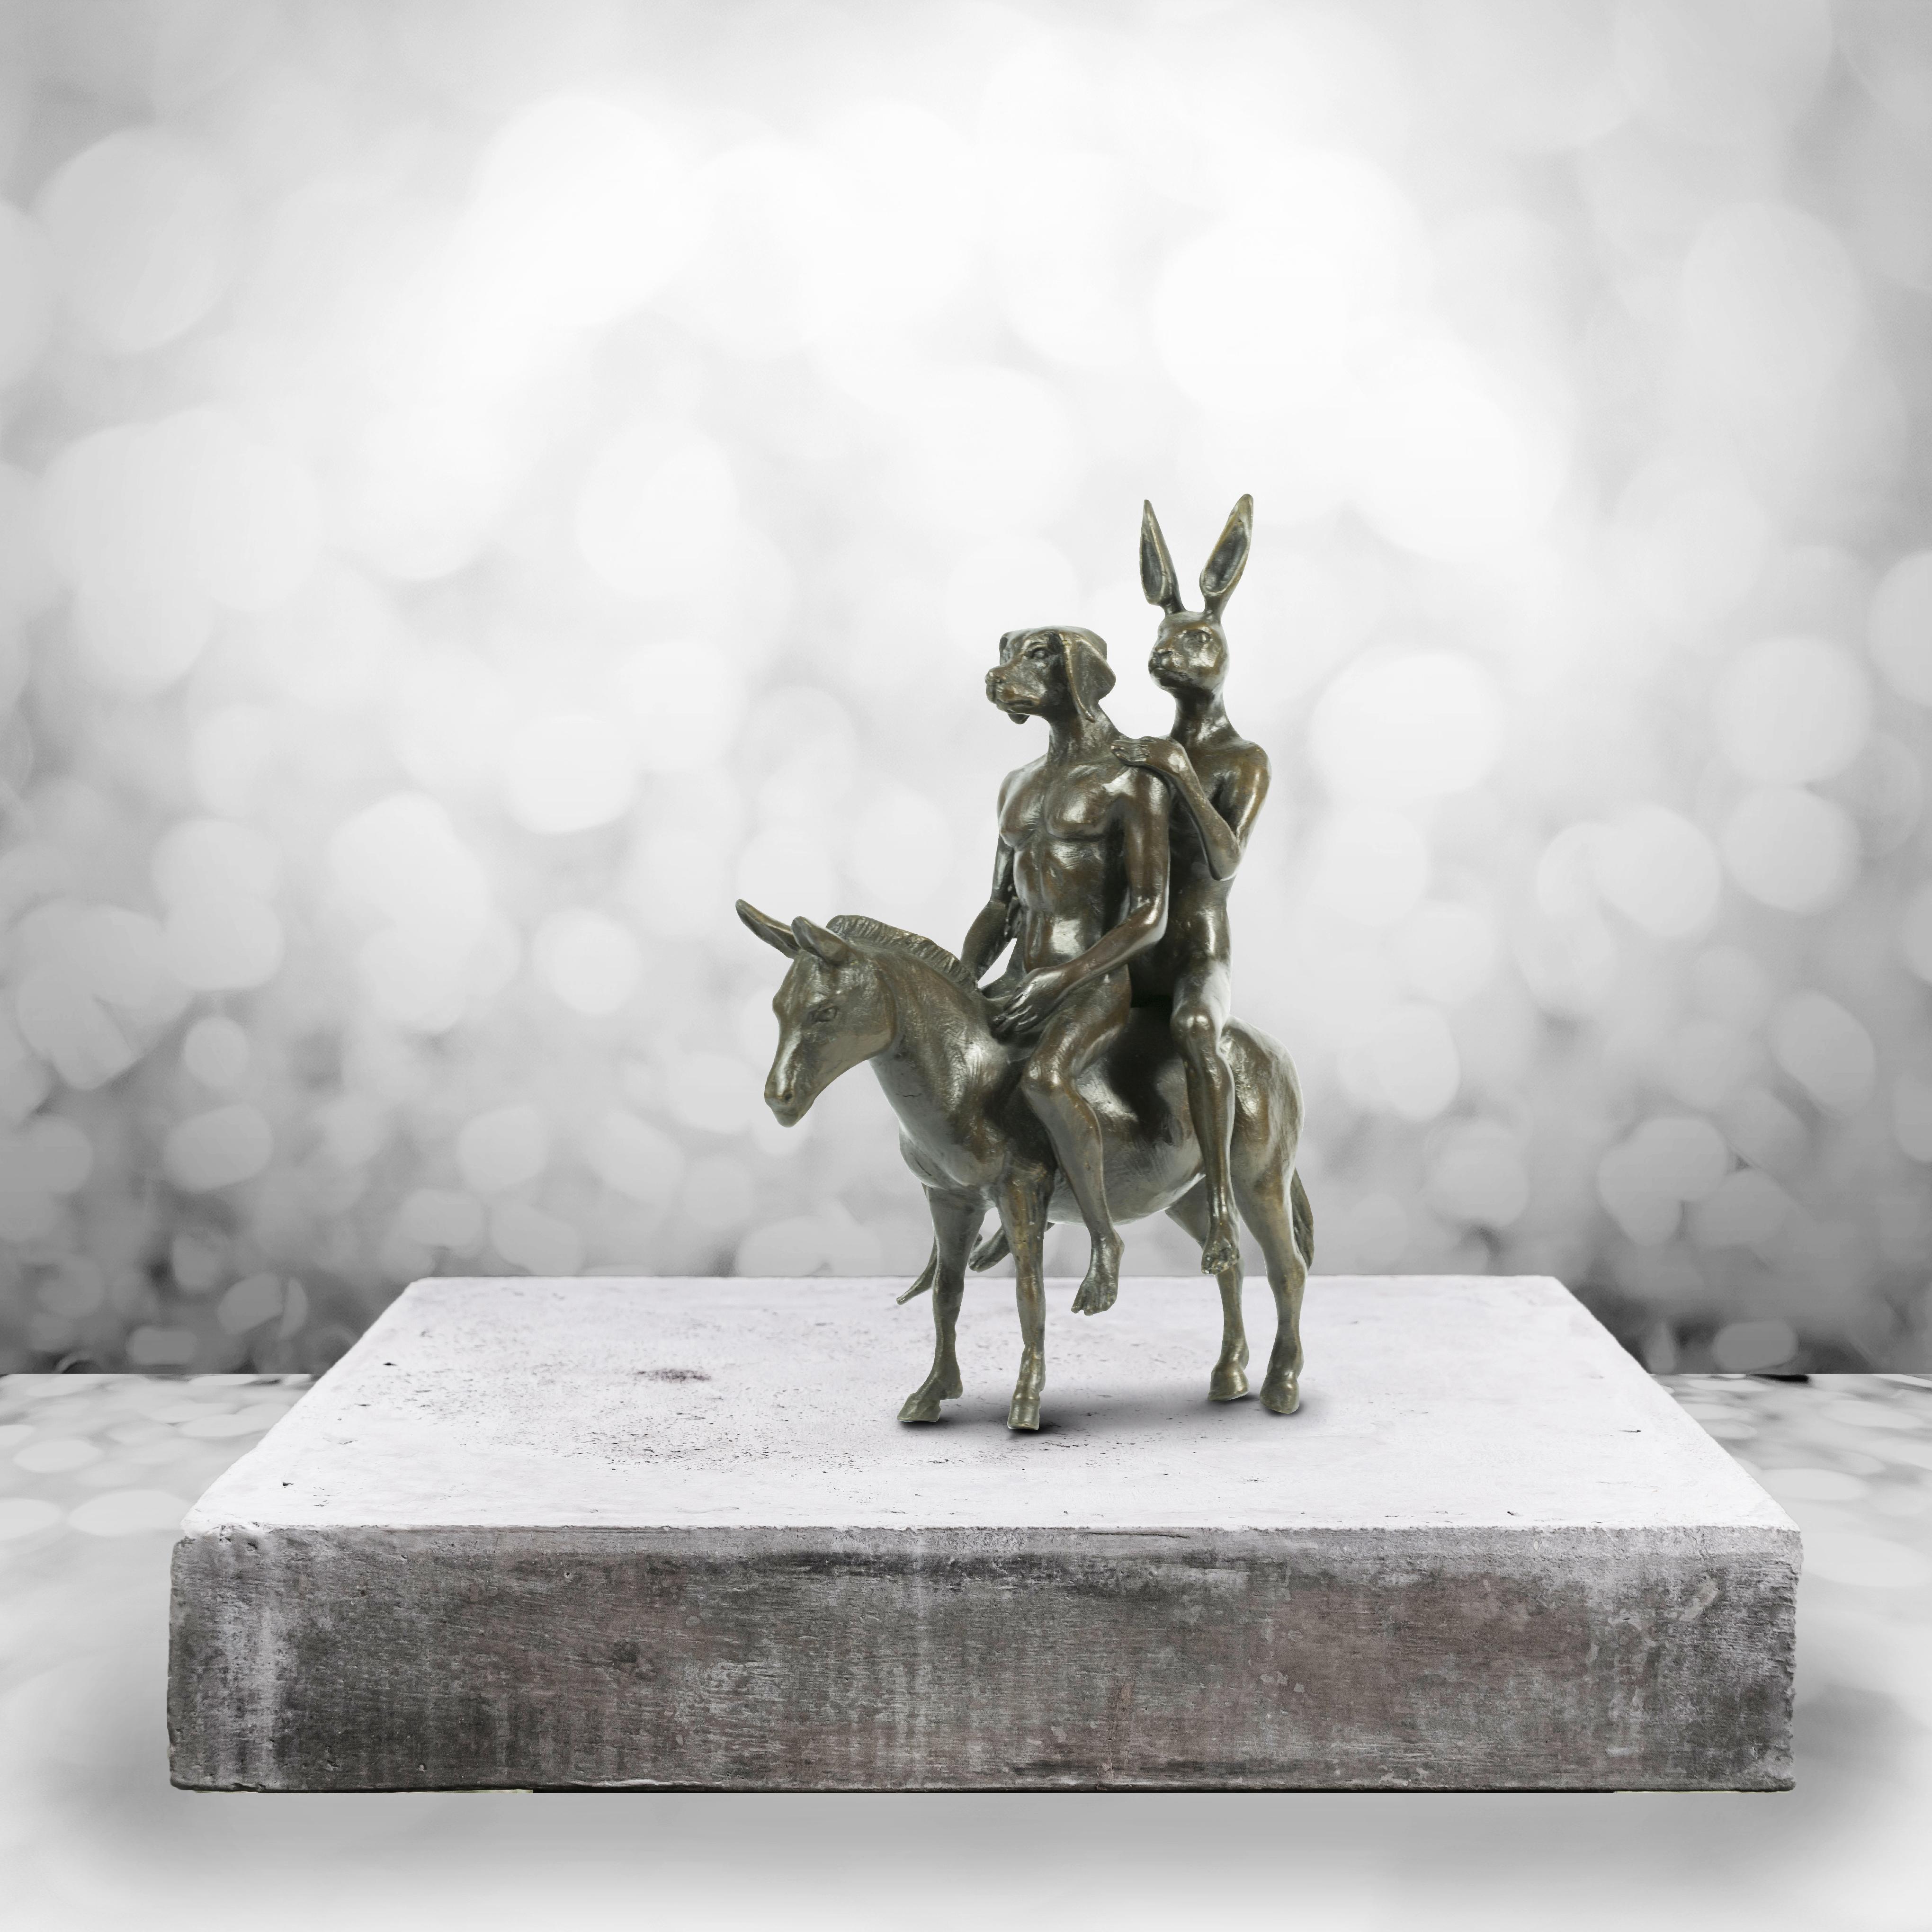 Authentic Limited Edition Bronze Travellers Arrived Sculpture - Gillie and Marc - Contemporary Art by Gillie and Marc Schattner